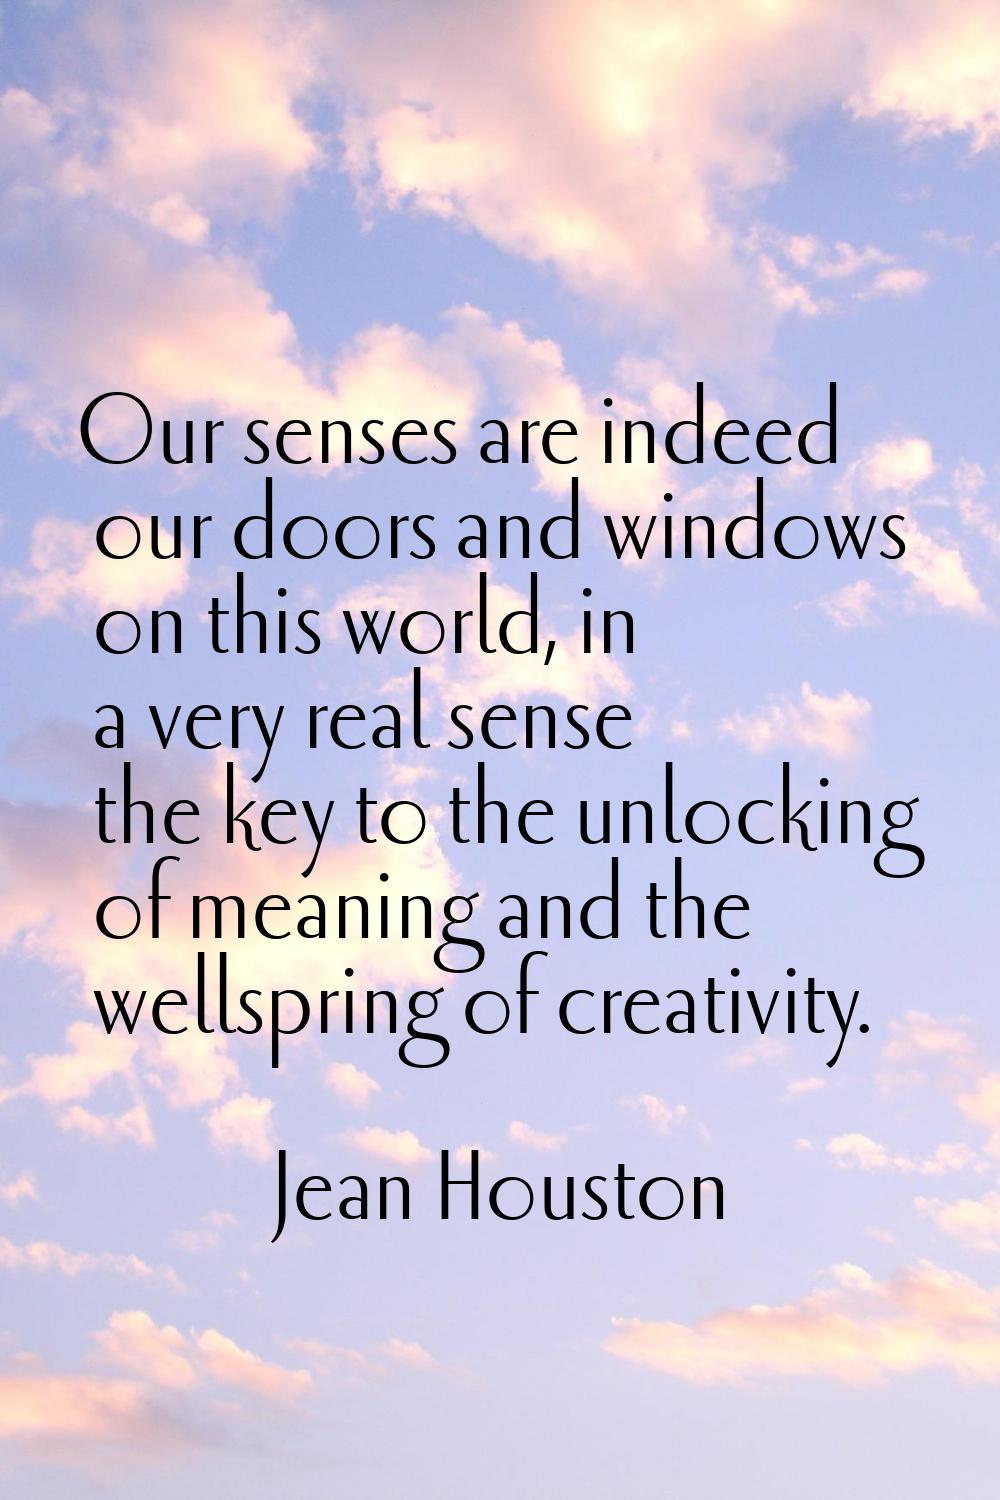 Our senses are indeed our doors and windows on this world, in a very real sense the key to the unlo